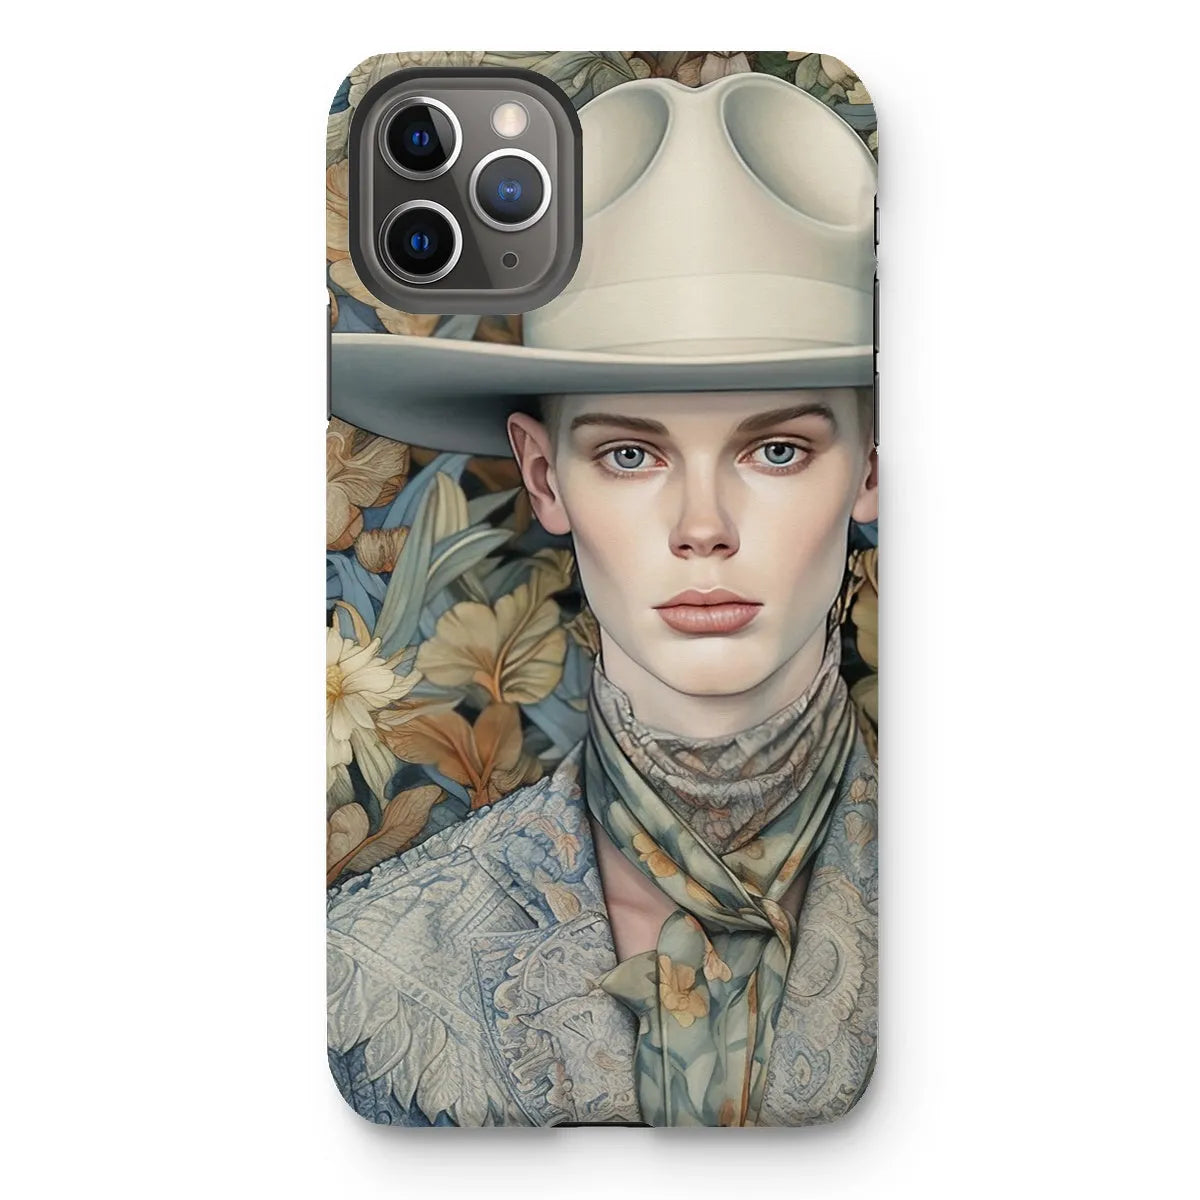 Jasper The Gay Cowboy - Dandy Gay Aesthetic Art Phone Case - Iphone 11 Pro Max / Matte - Mobile Phone Cases - Aesthetic